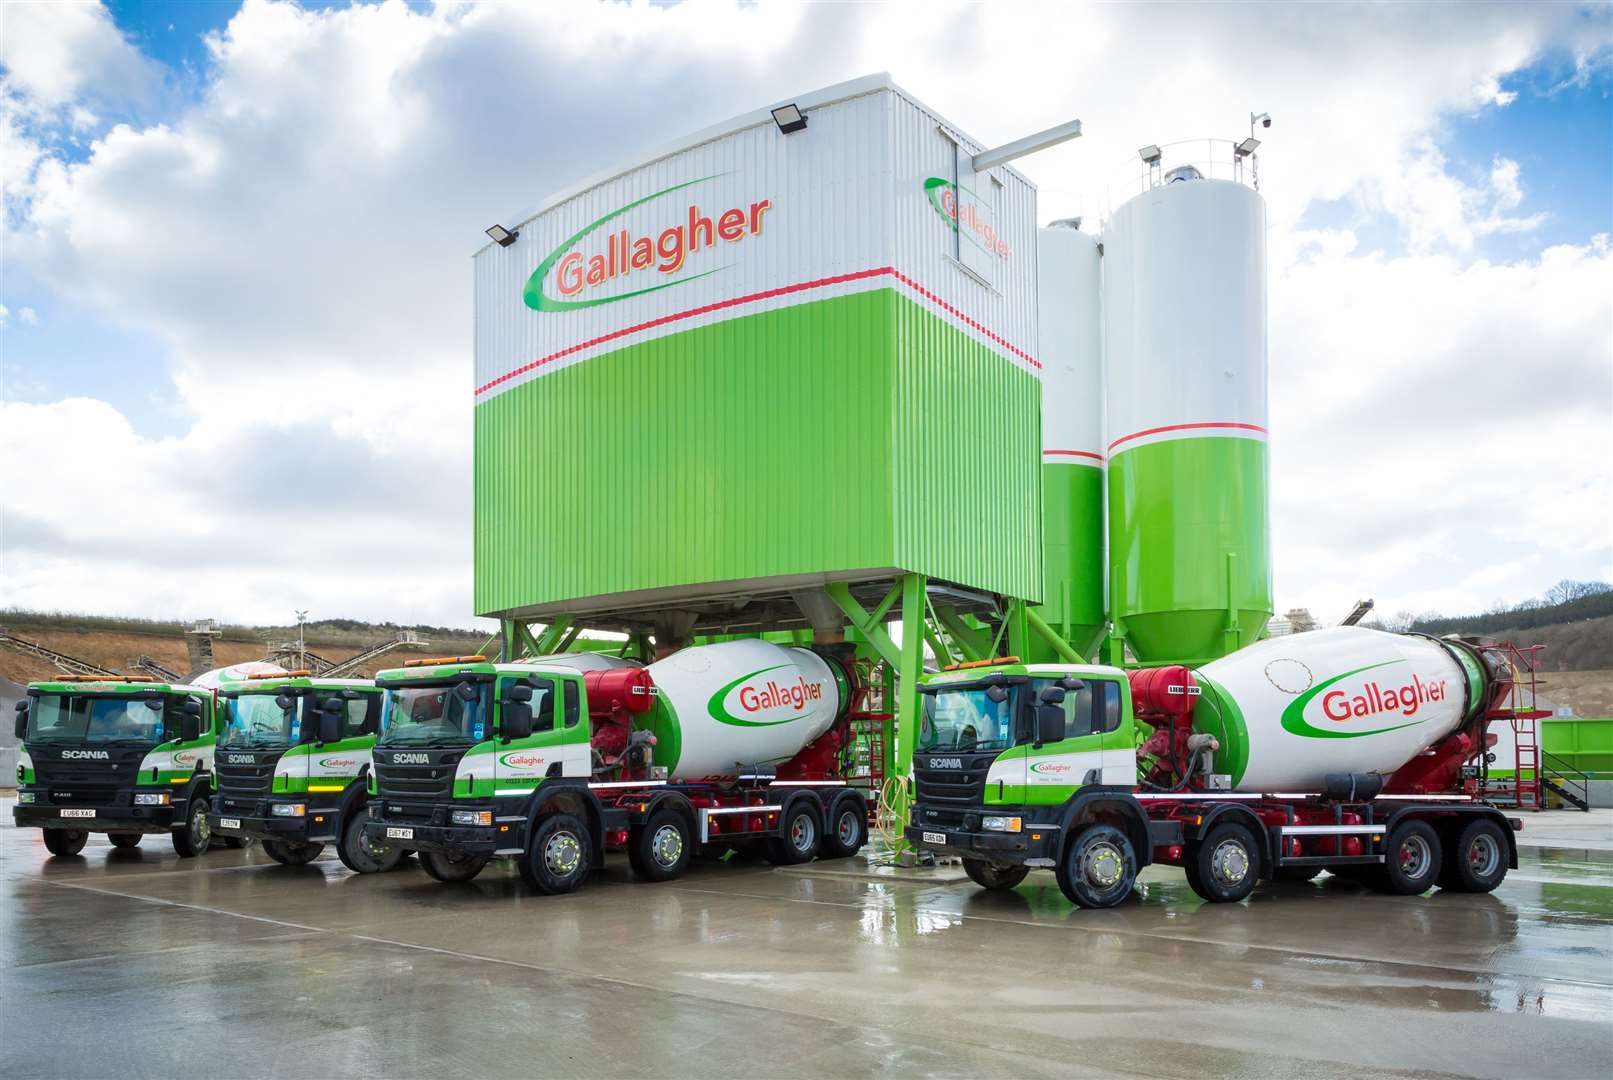 Gallagher Group has doubled its concrete production facilities